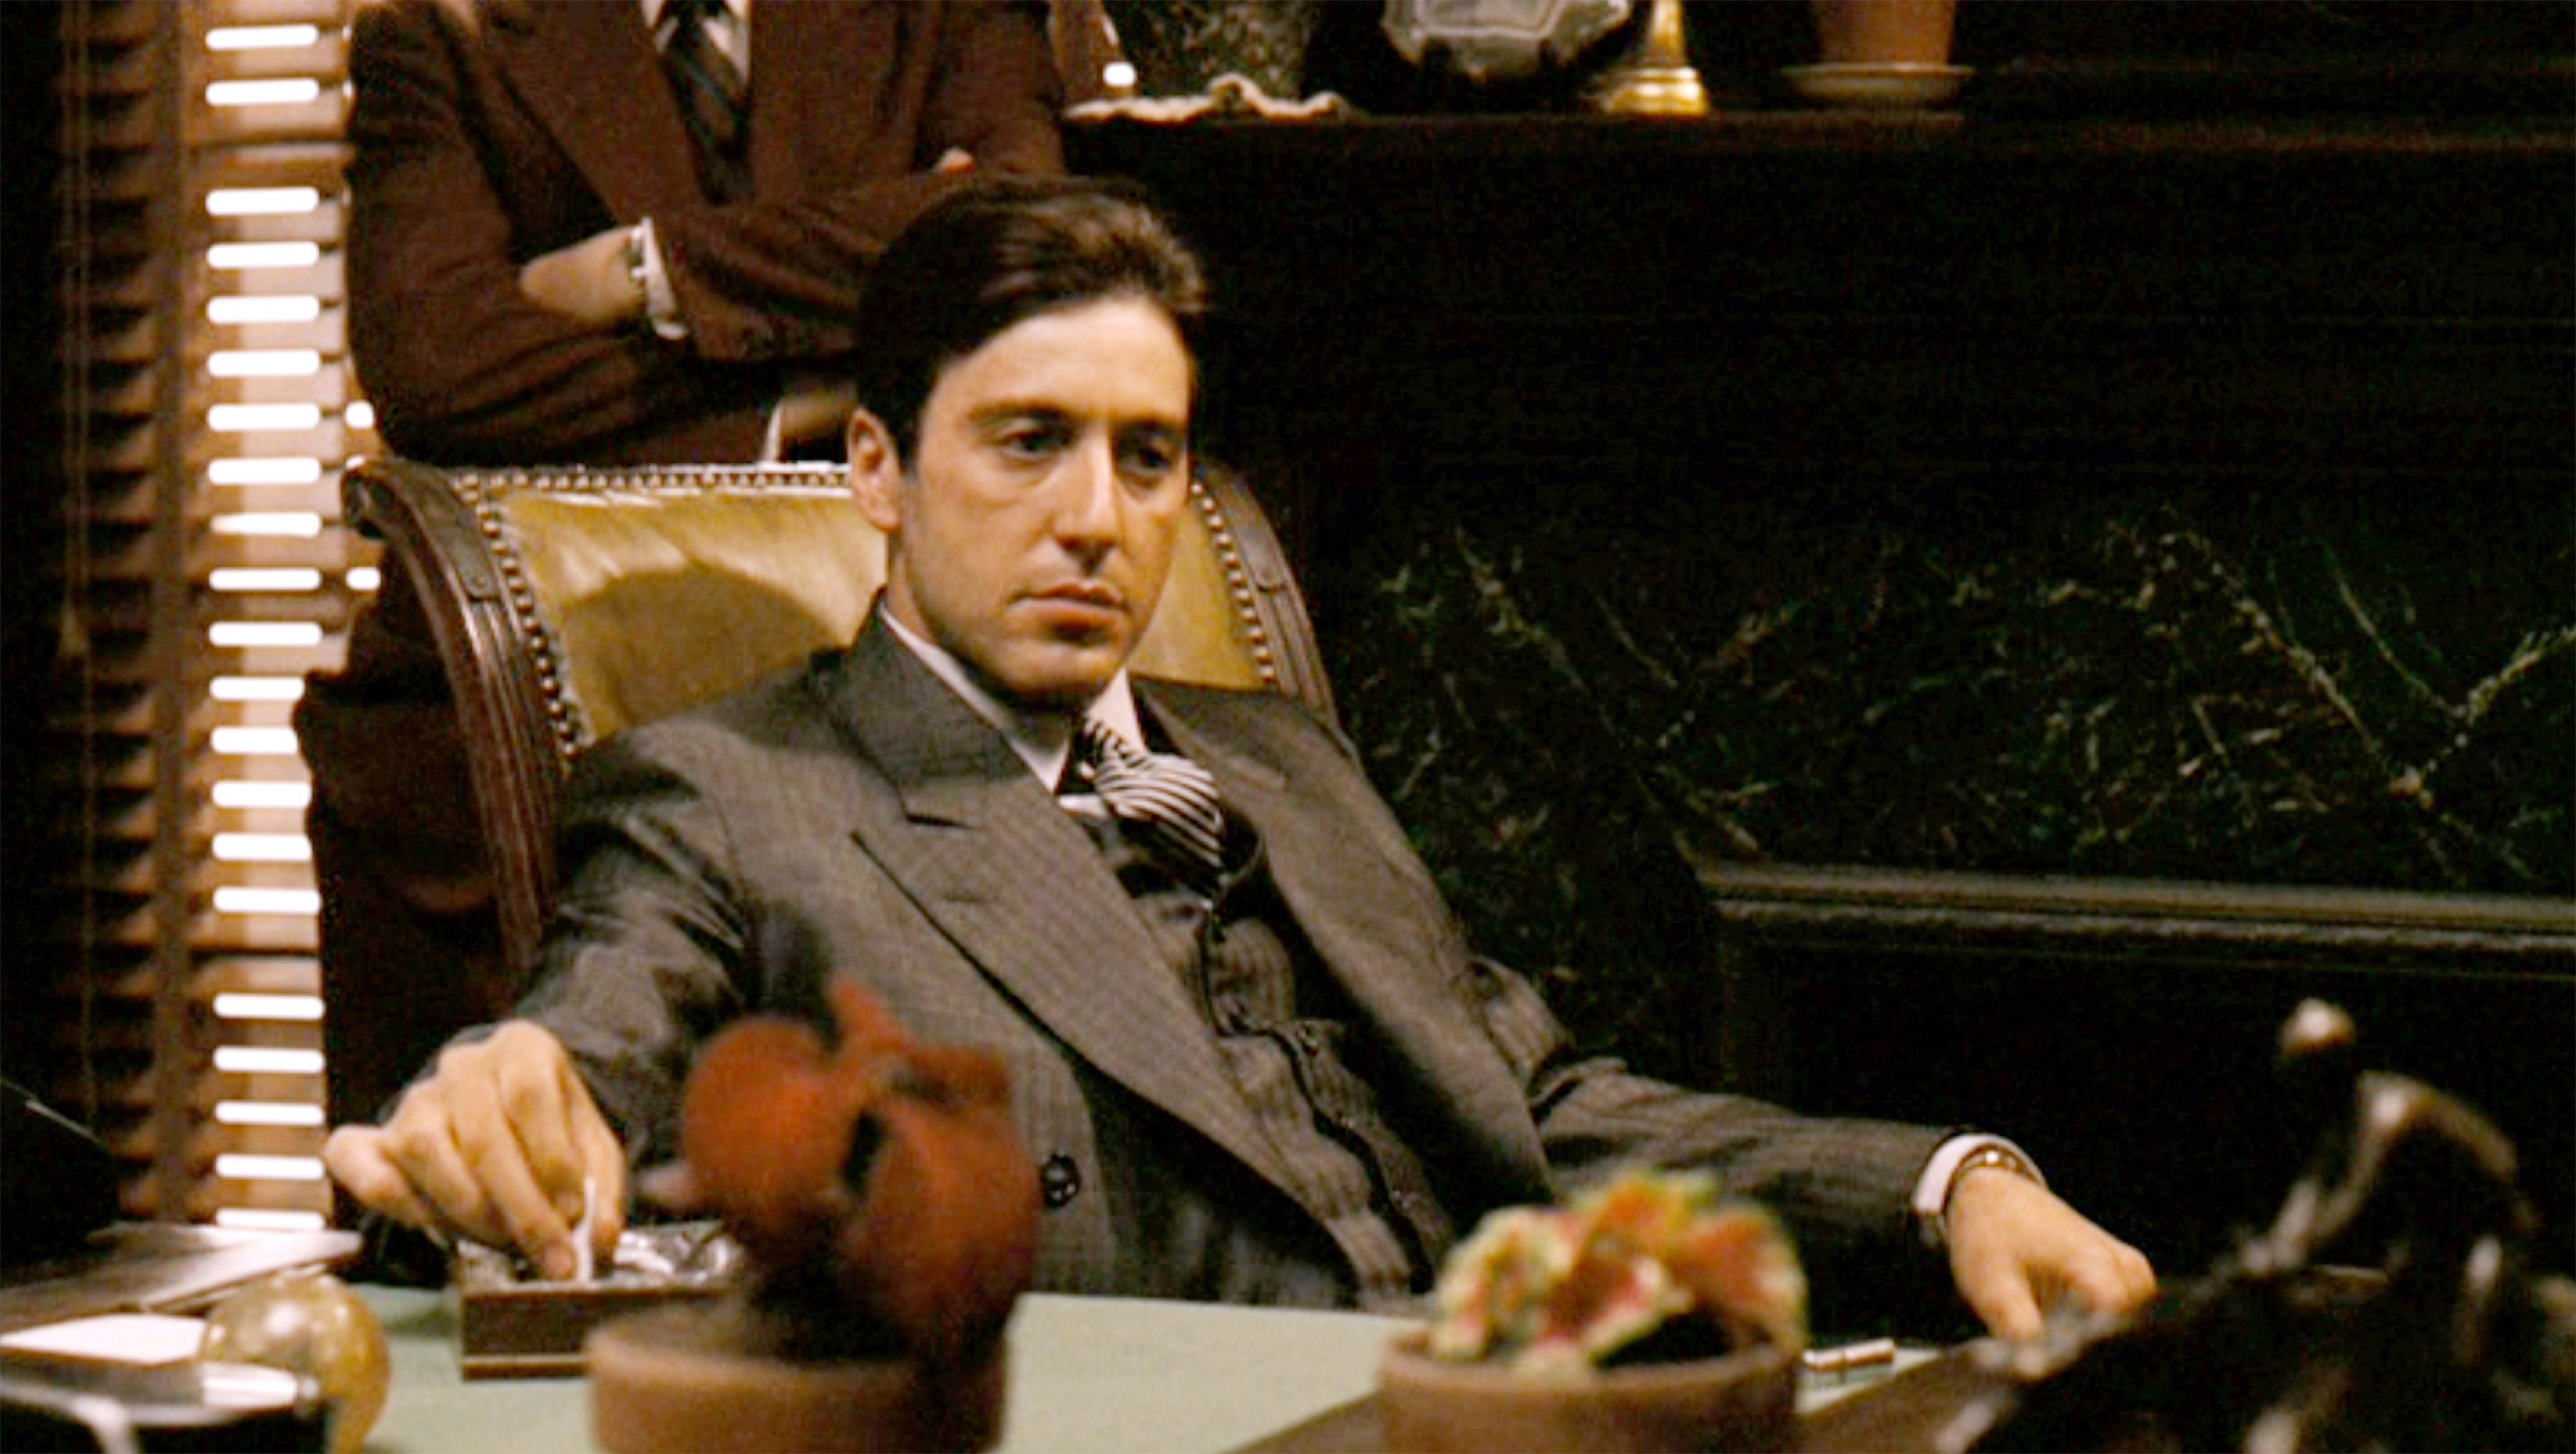 Al Pacino As Michael Corleone in The Godfather